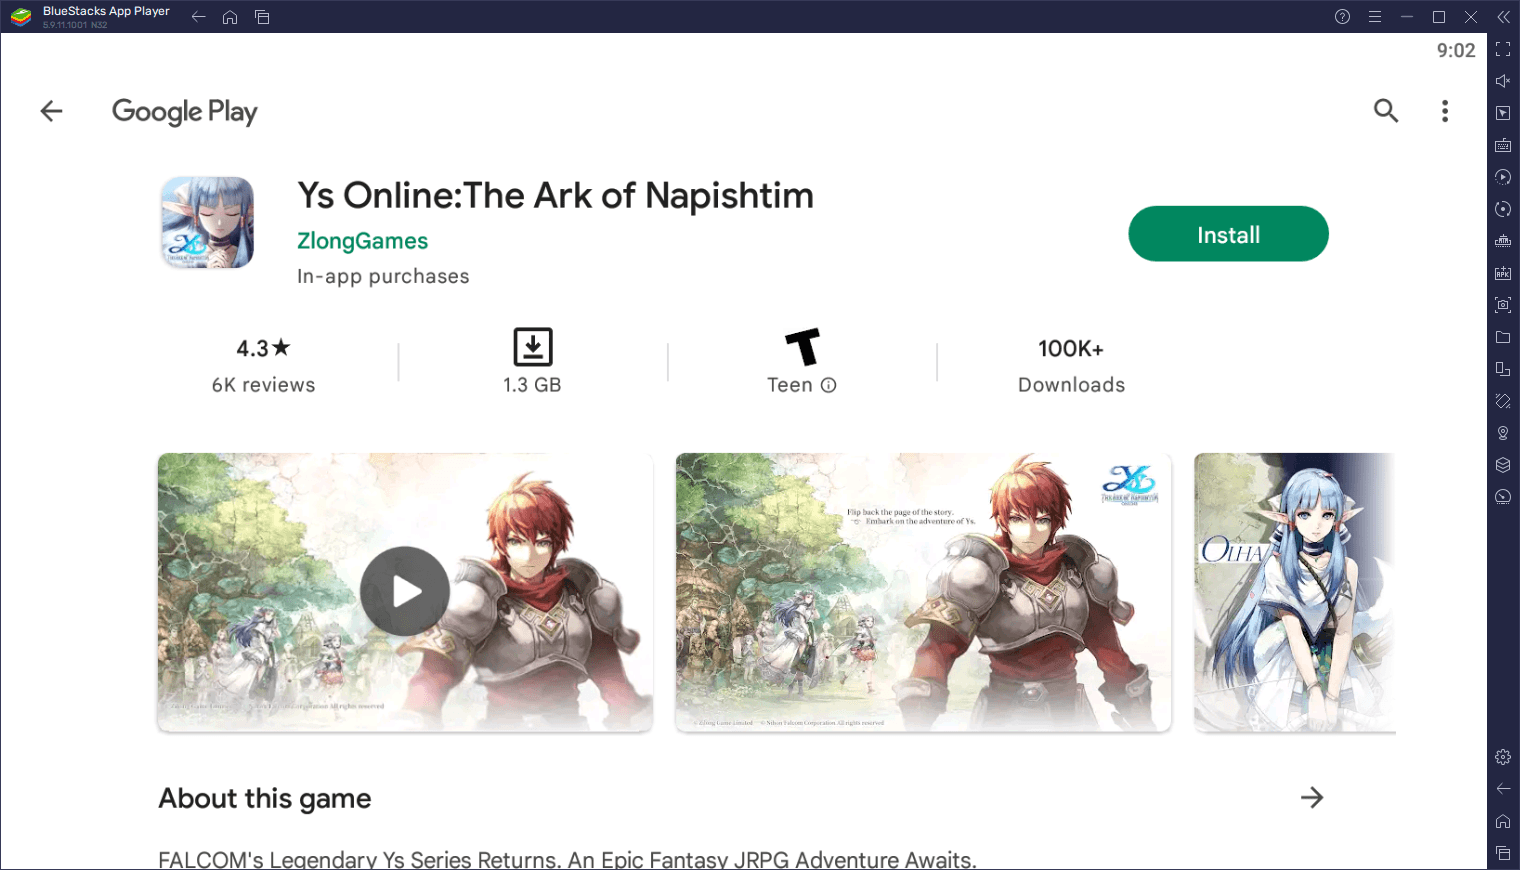 How to Play Ys Online: The Ark of Napishtim on PC with BlueStacks